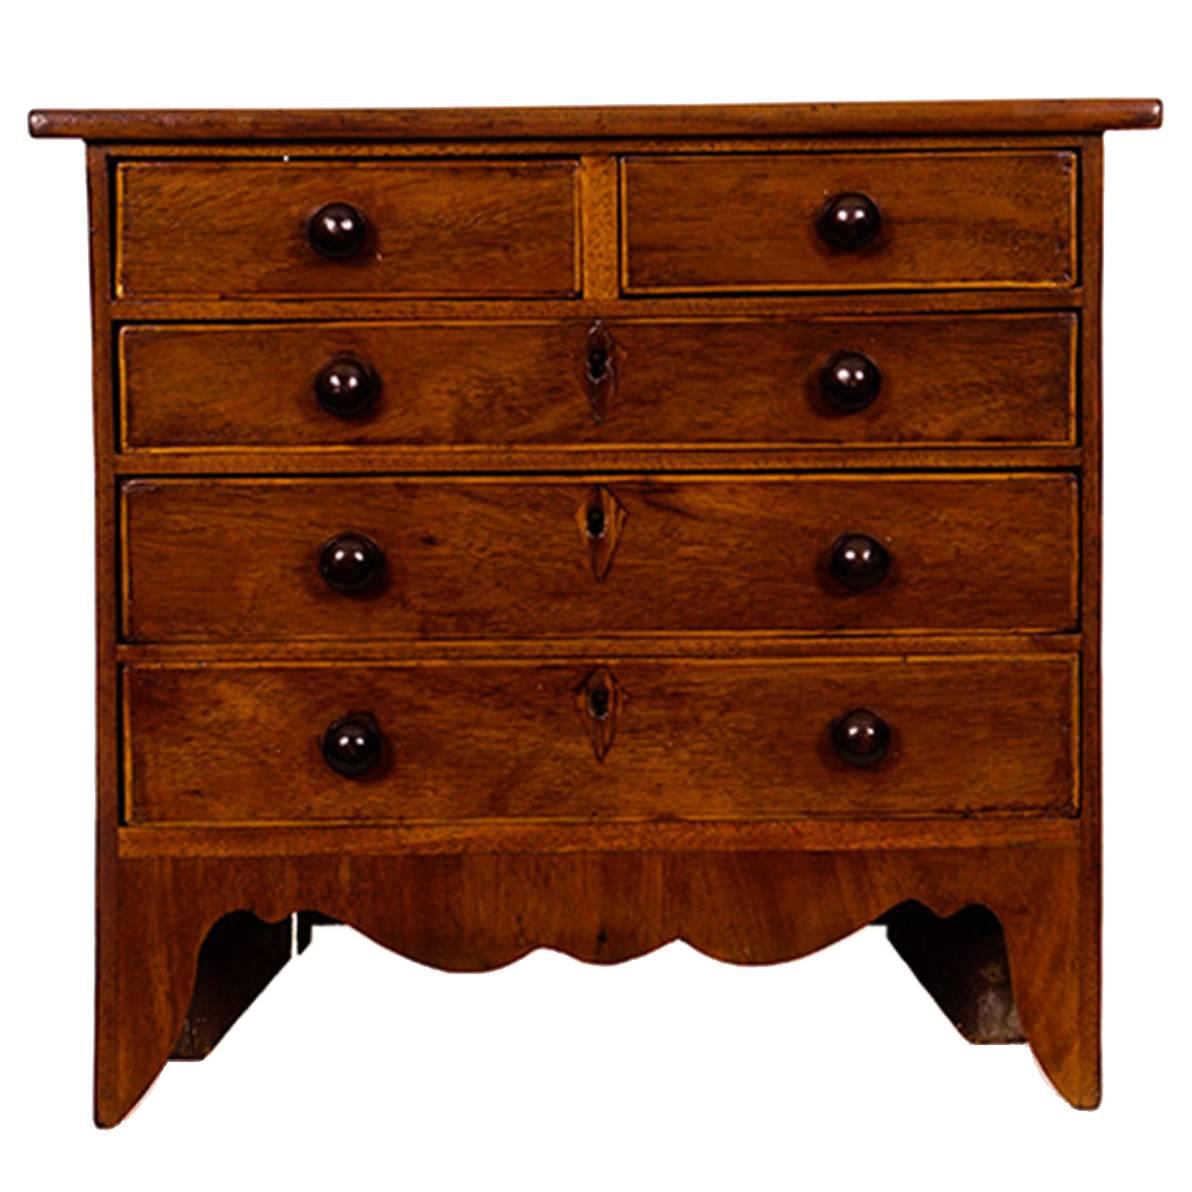 19th Century Regency Mahogany Miniature Chest of Drawers For Sale